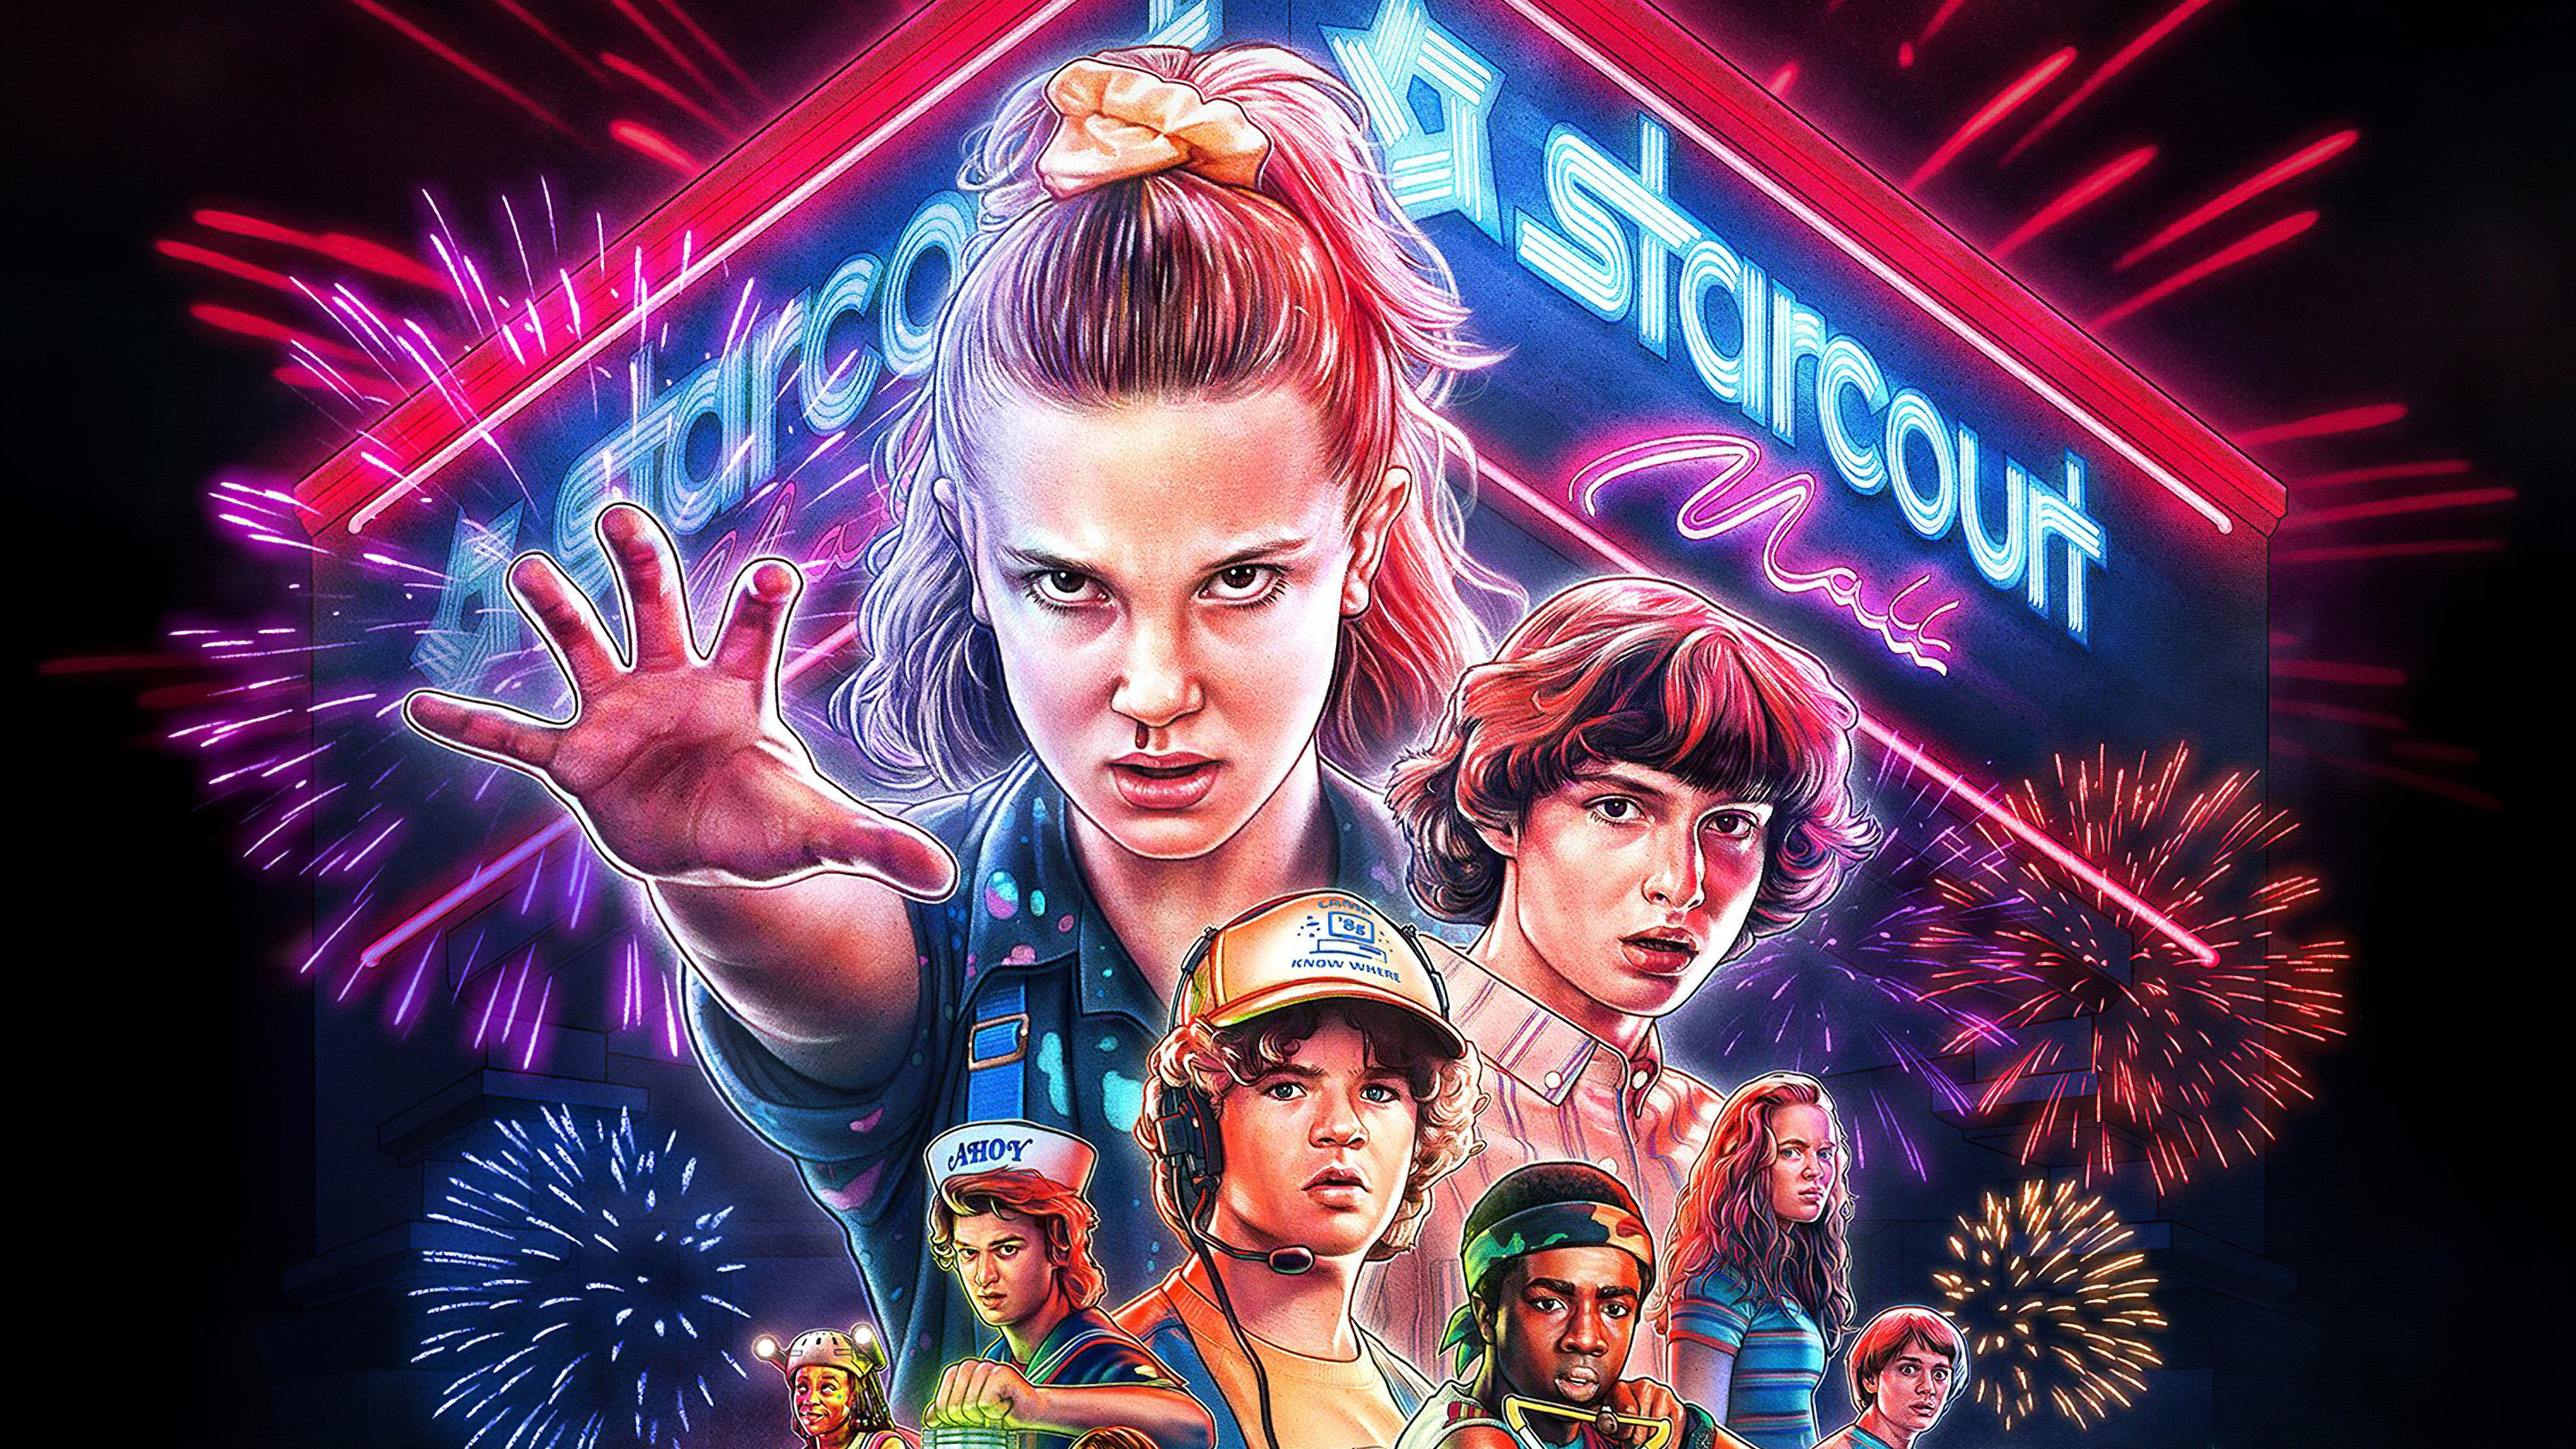 Stranger things collage HD wallpapers  Pxfuel